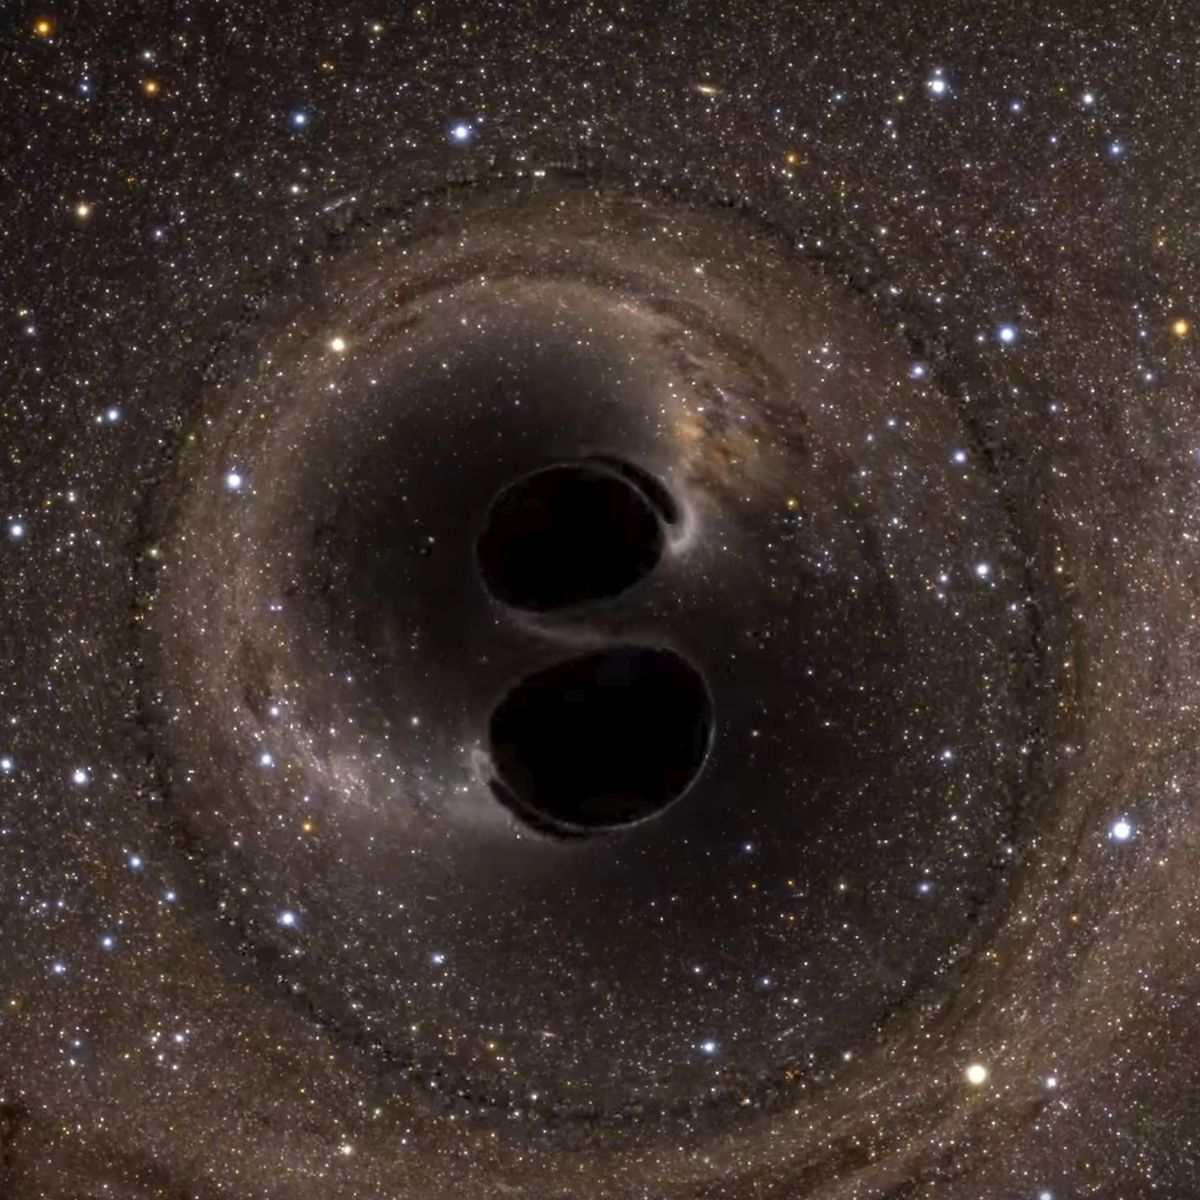 physicists at mit and elsewhere have used gravitational waves to observationally confirm hawking’s black hole area theorem for the first time this computer simulation shows the collision of two black holes that produced the gravitational wave signal, gw150914